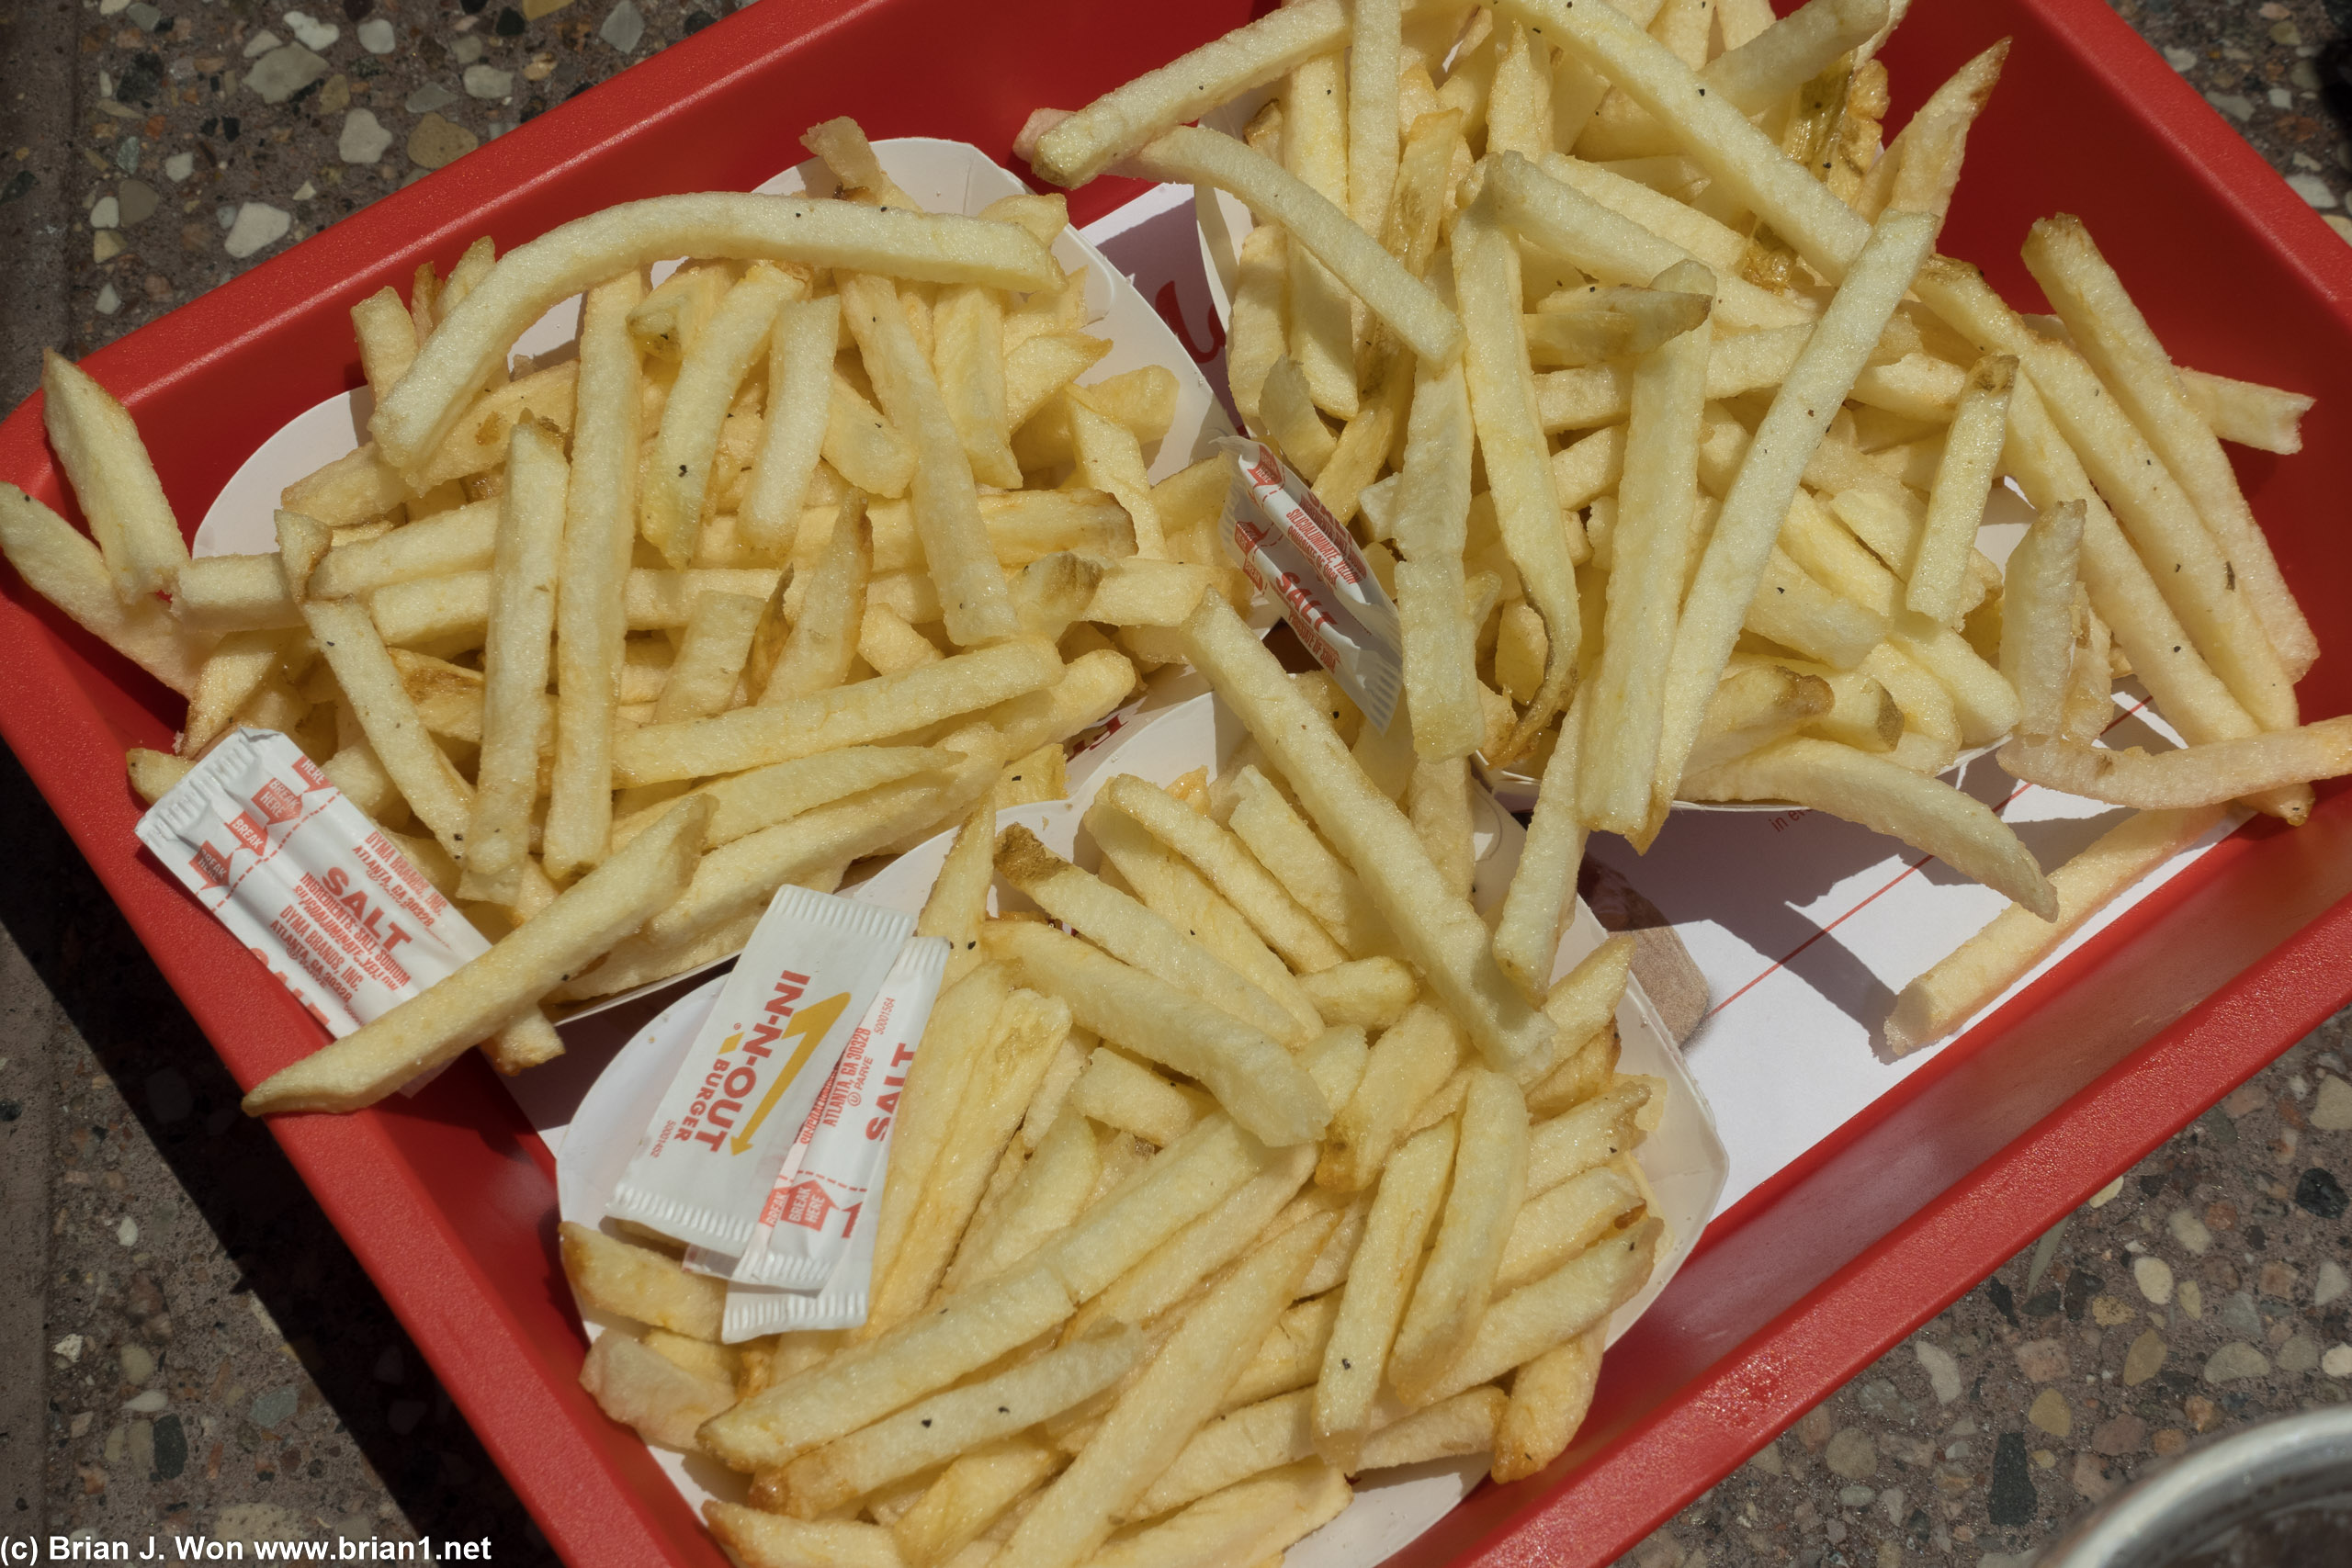 French fries hit the spot.